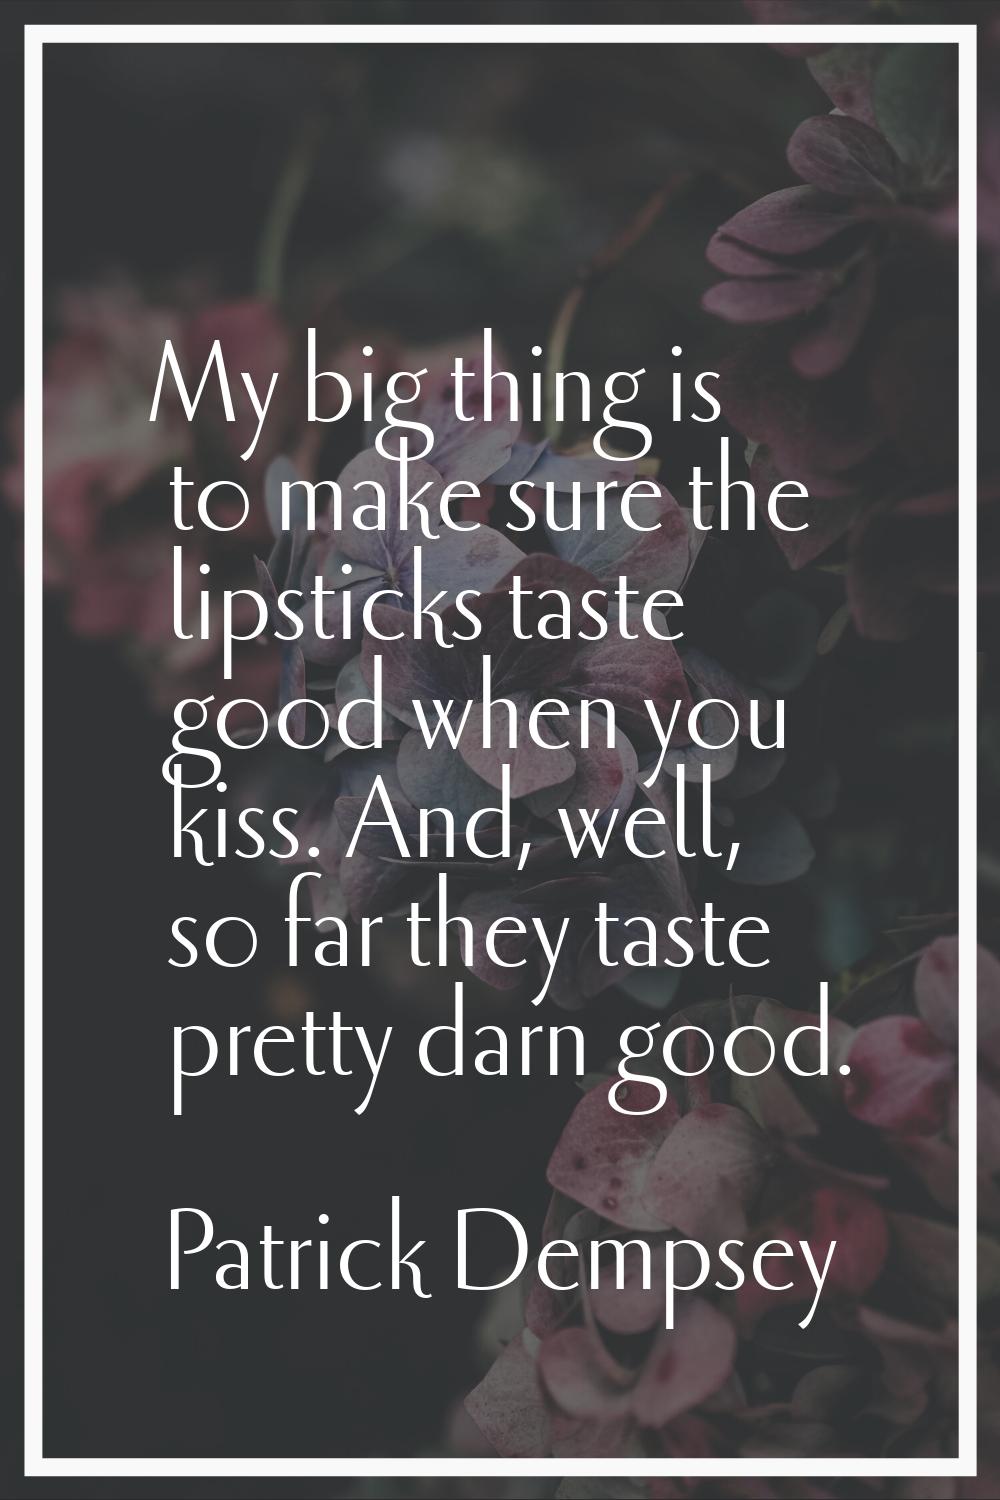 My big thing is to make sure the lipsticks taste good when you kiss. And, well, so far they taste p